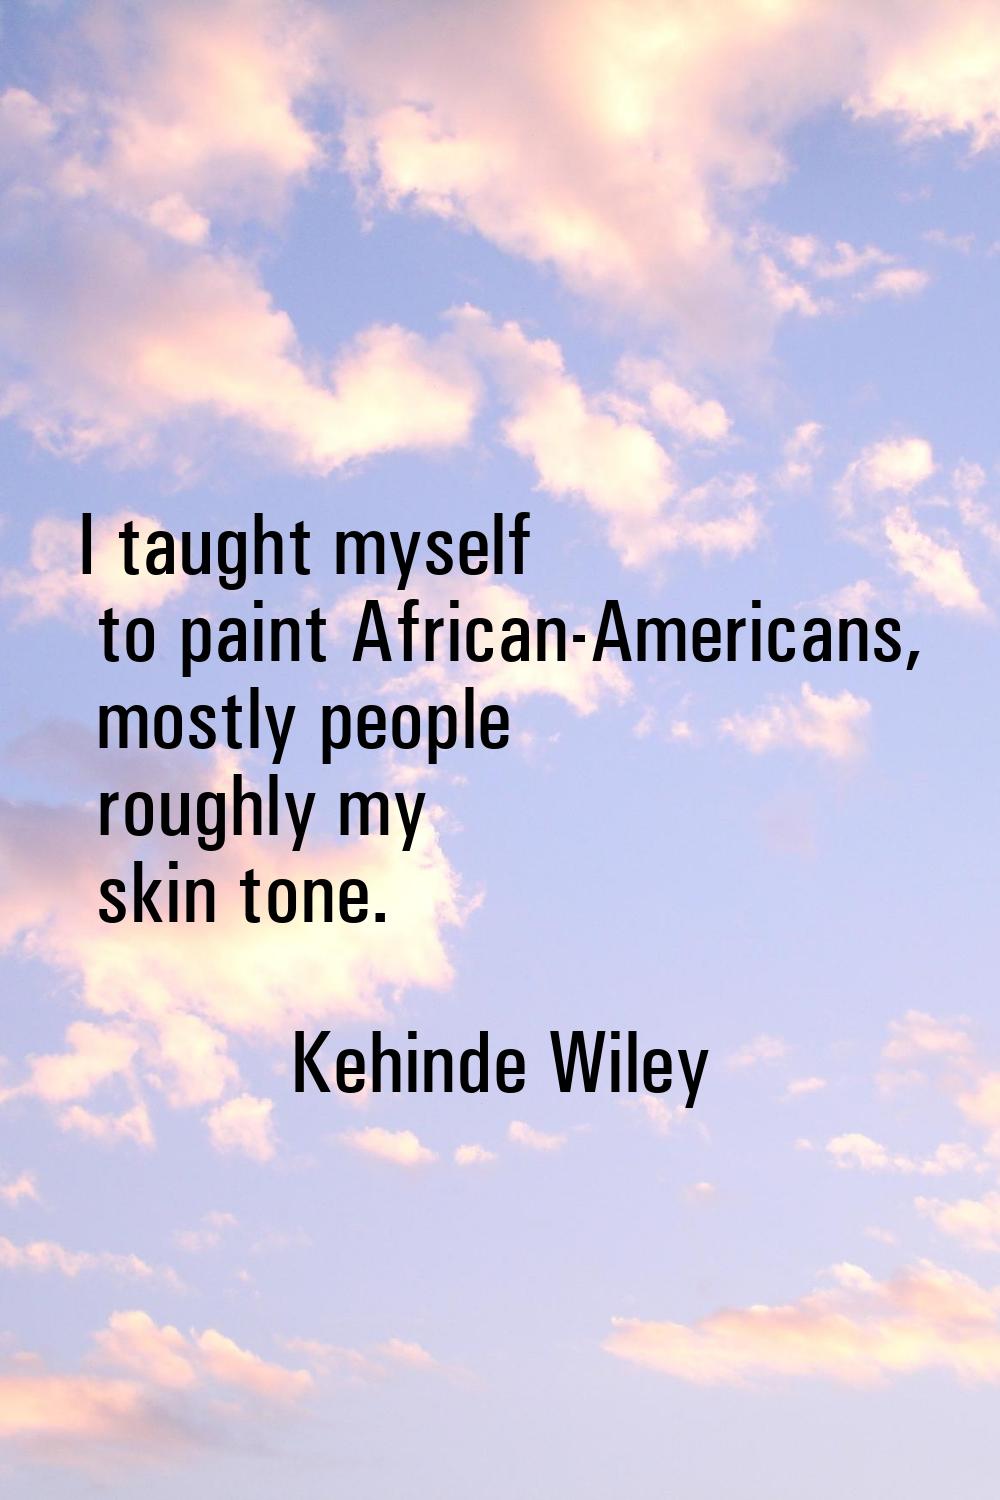 I taught myself to paint African-Americans, mostly people roughly my skin tone.